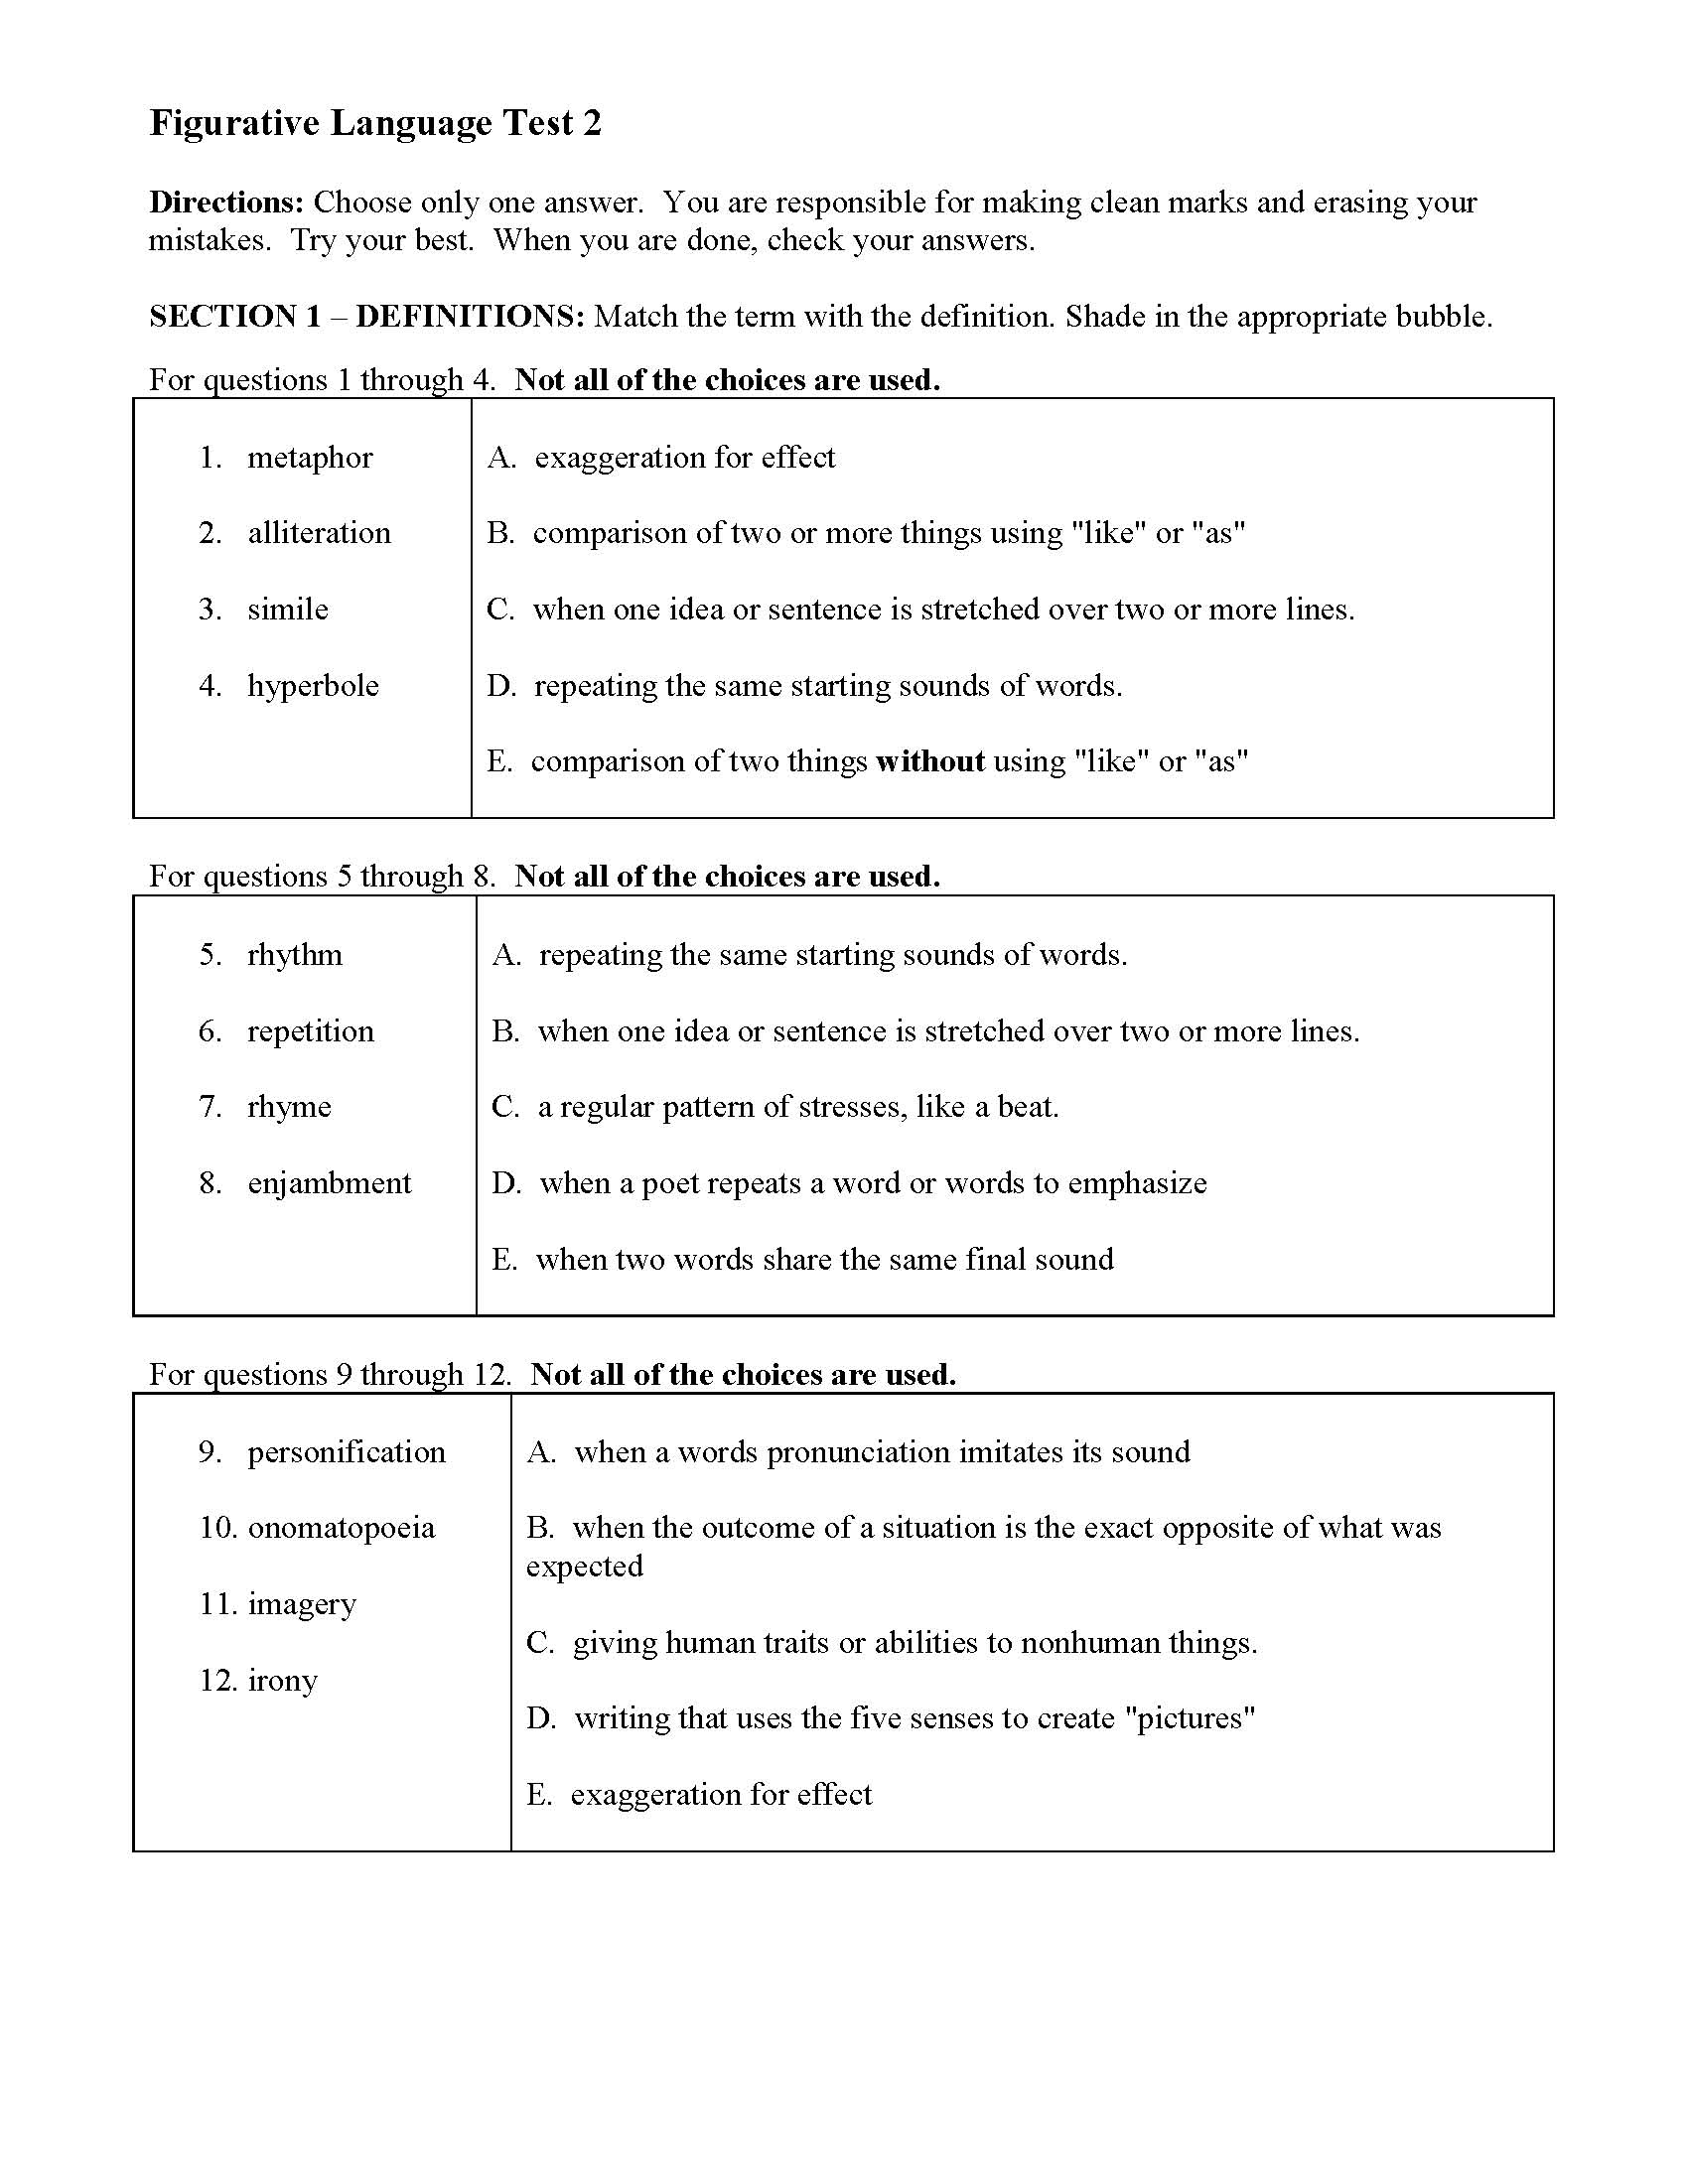 This is a preview image of Figurative Language Test 2. Click on it to enlarge it or view the source file.